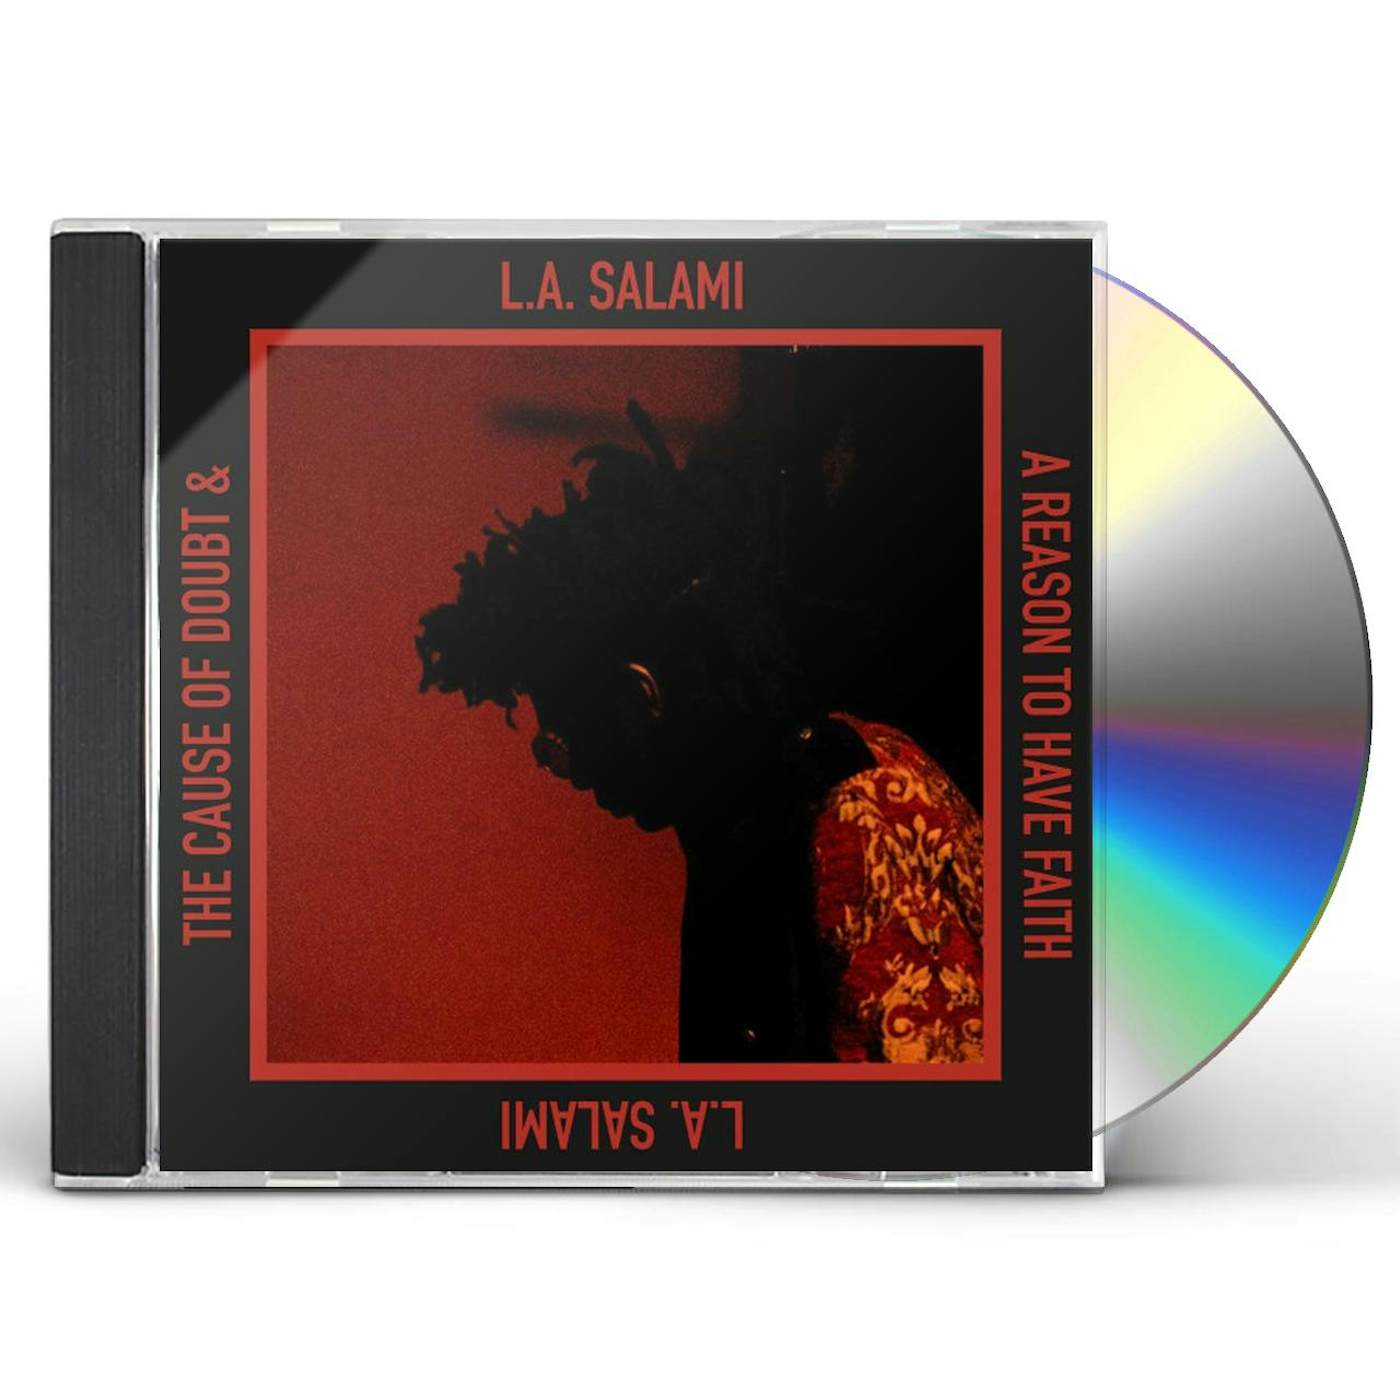 L.A. Salami CAUSE OF DOUBT & A REASON TO HAVE FAITH CD